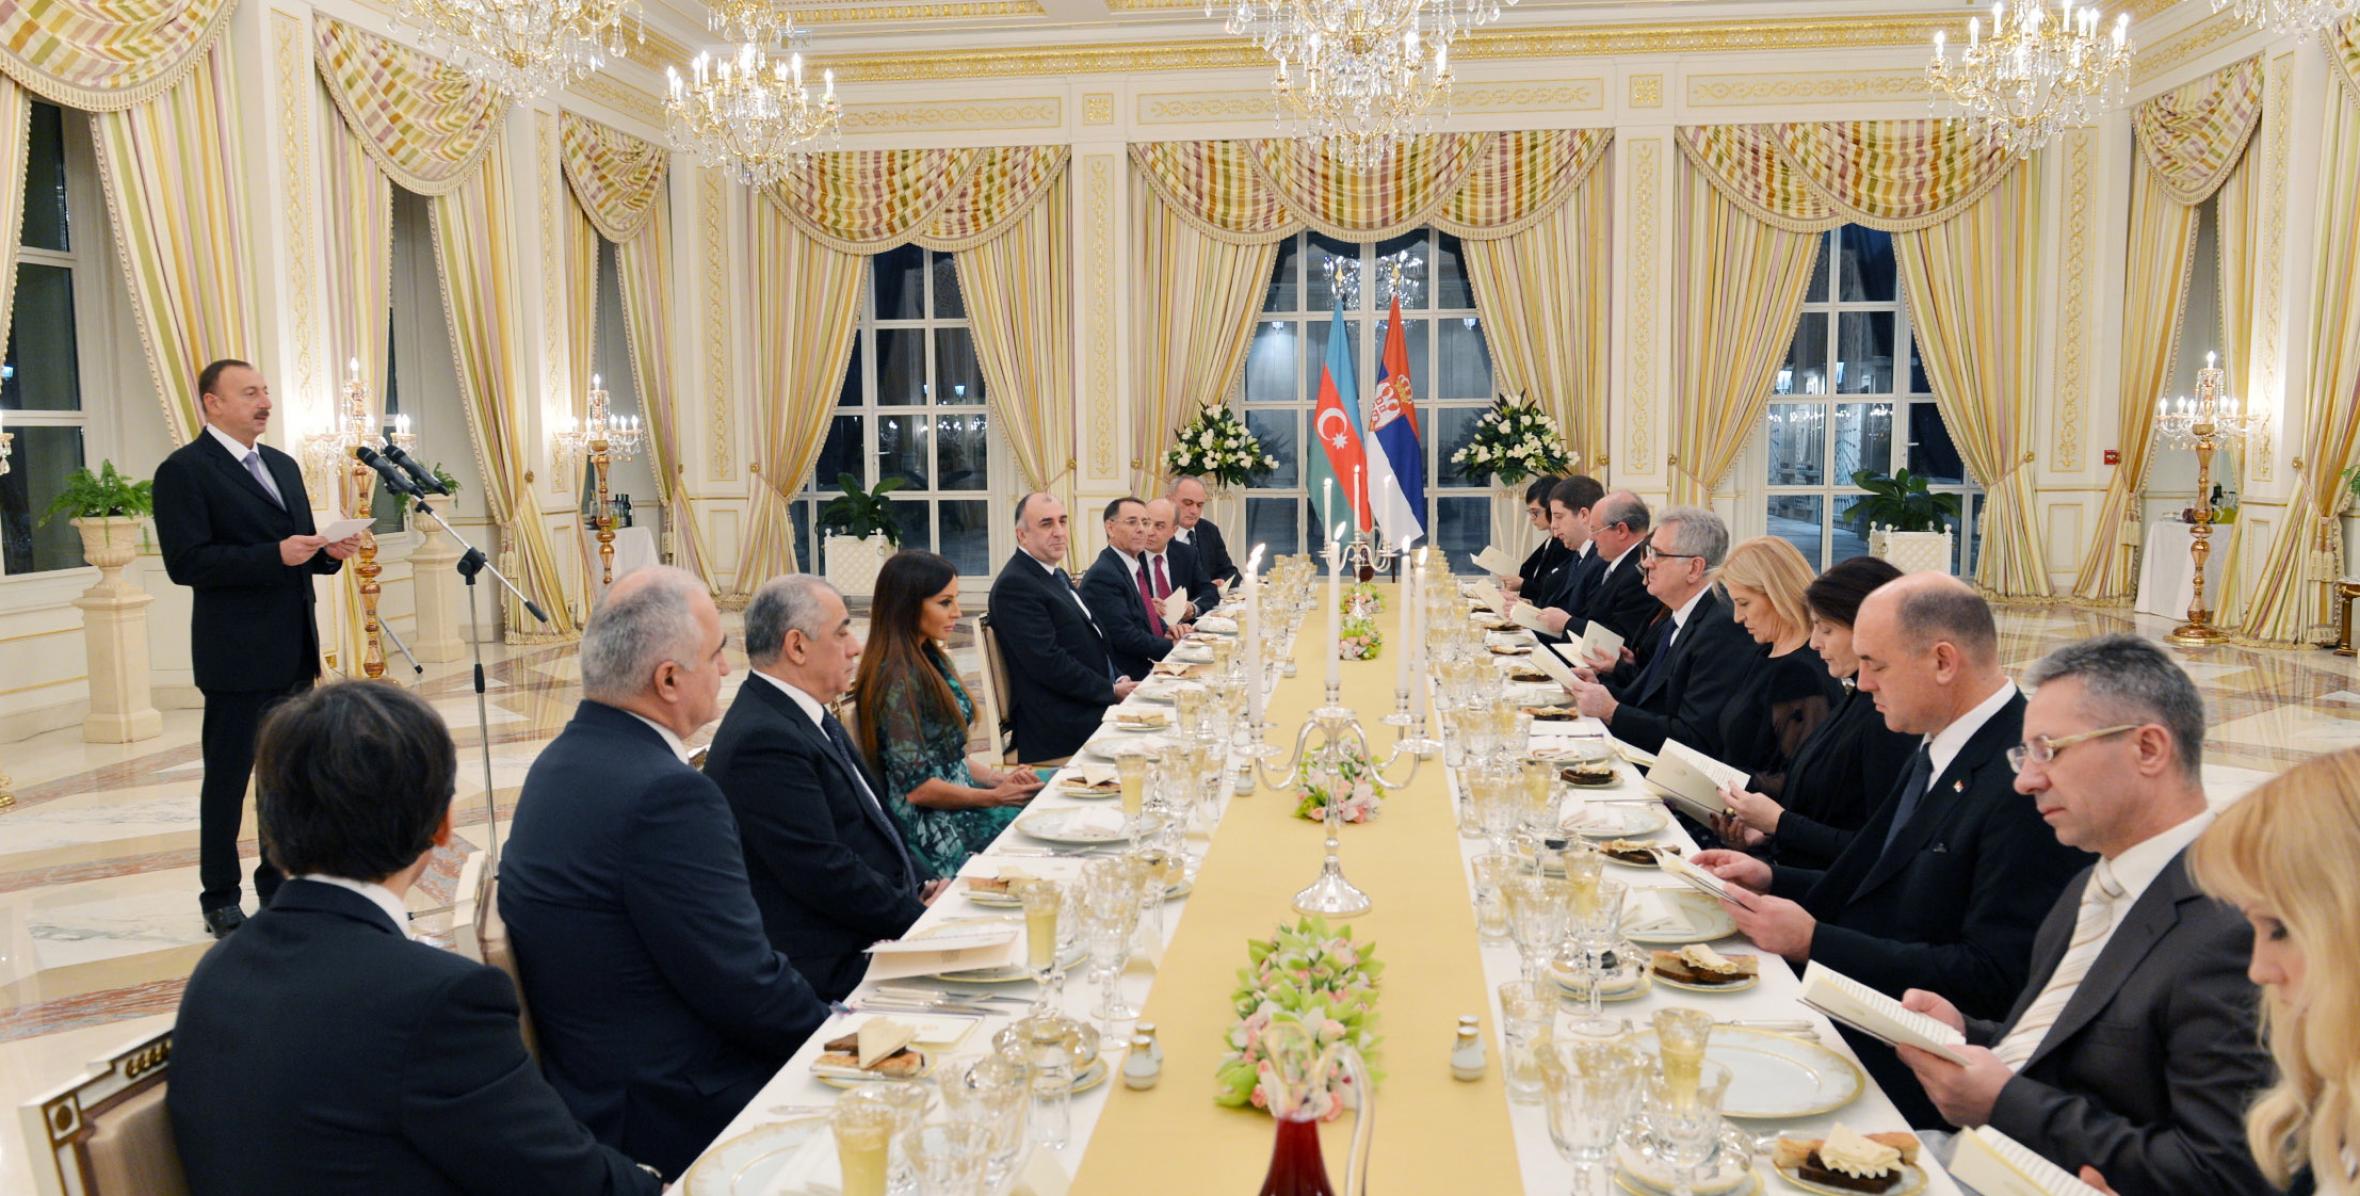 Ilham Aliyev hosted an official reception in honor of President of the Republic of Serbia Tomislav Nikolic